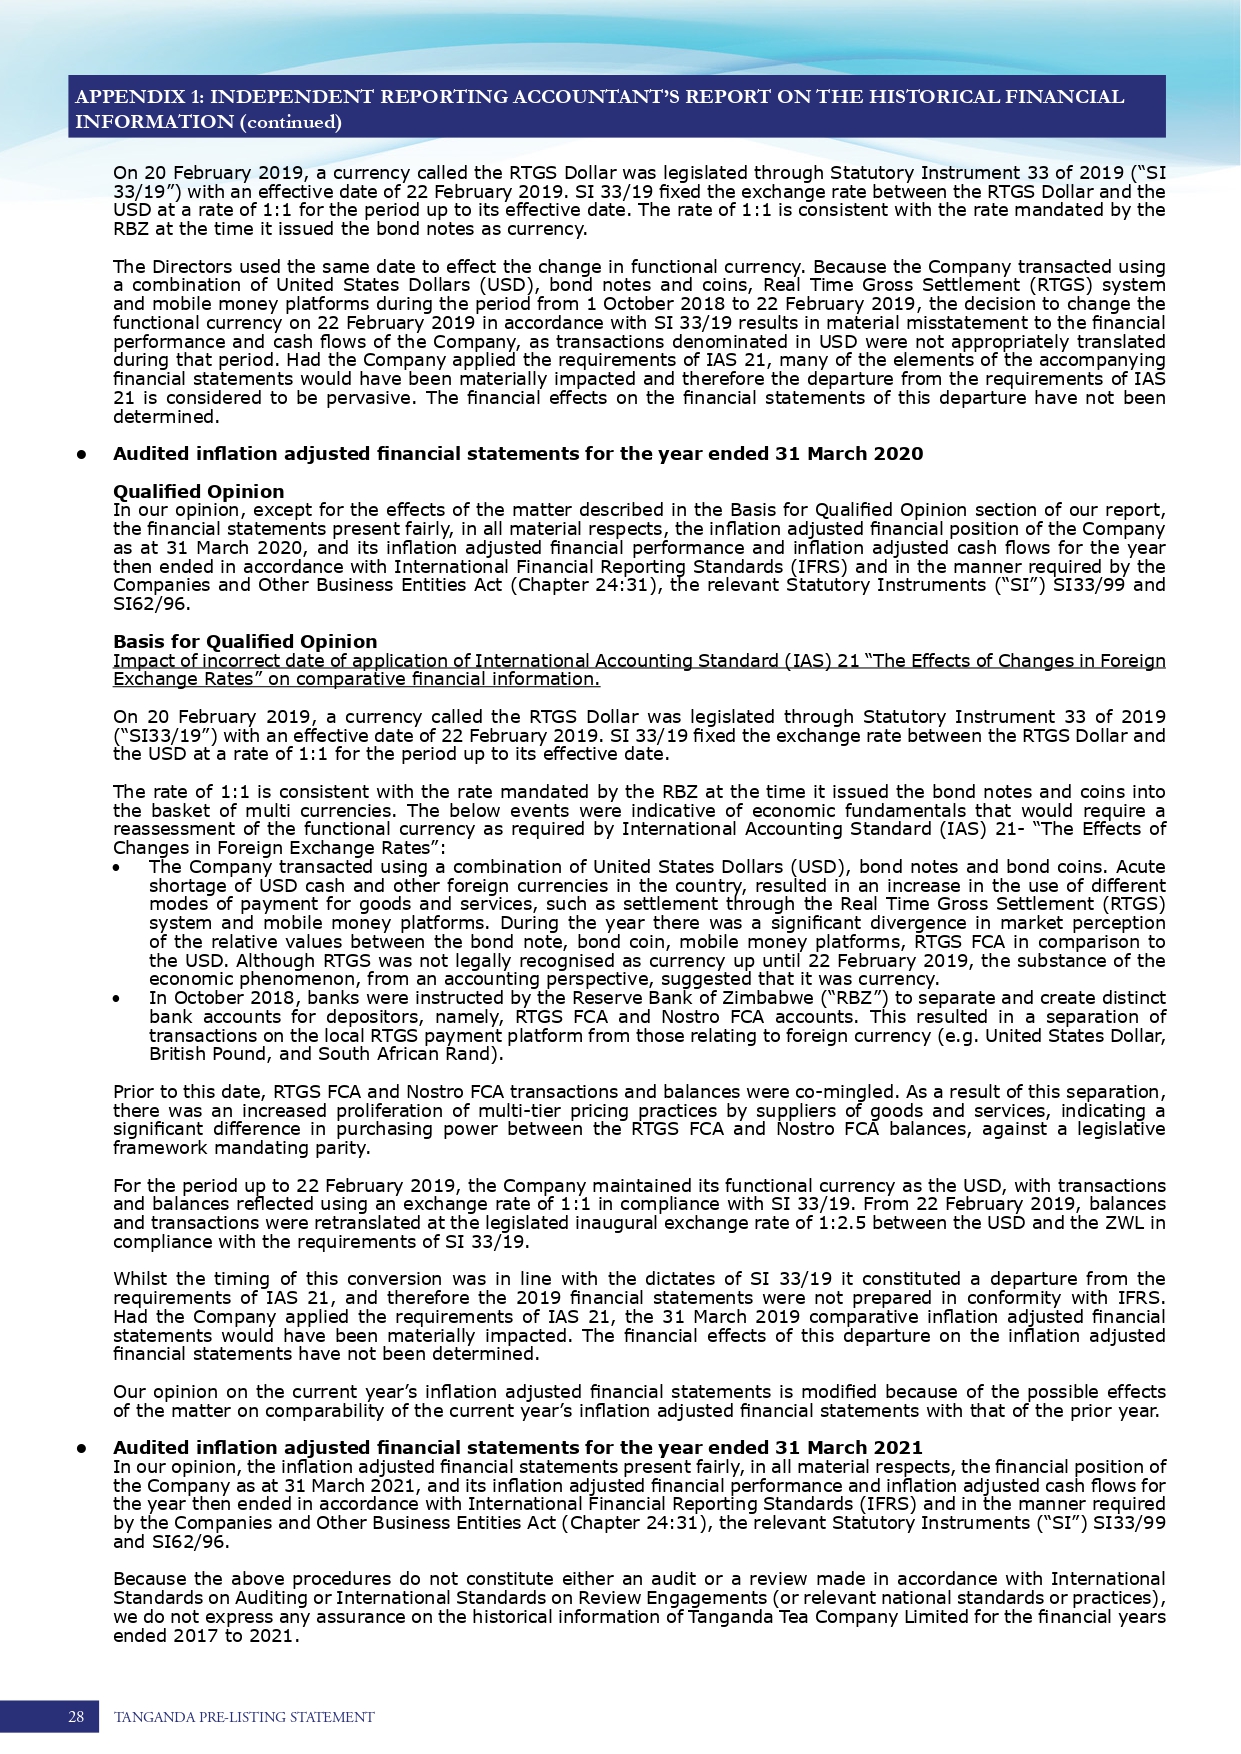 Tanganda Pre-Listing Statement 2021_pages-to-jpg-0030